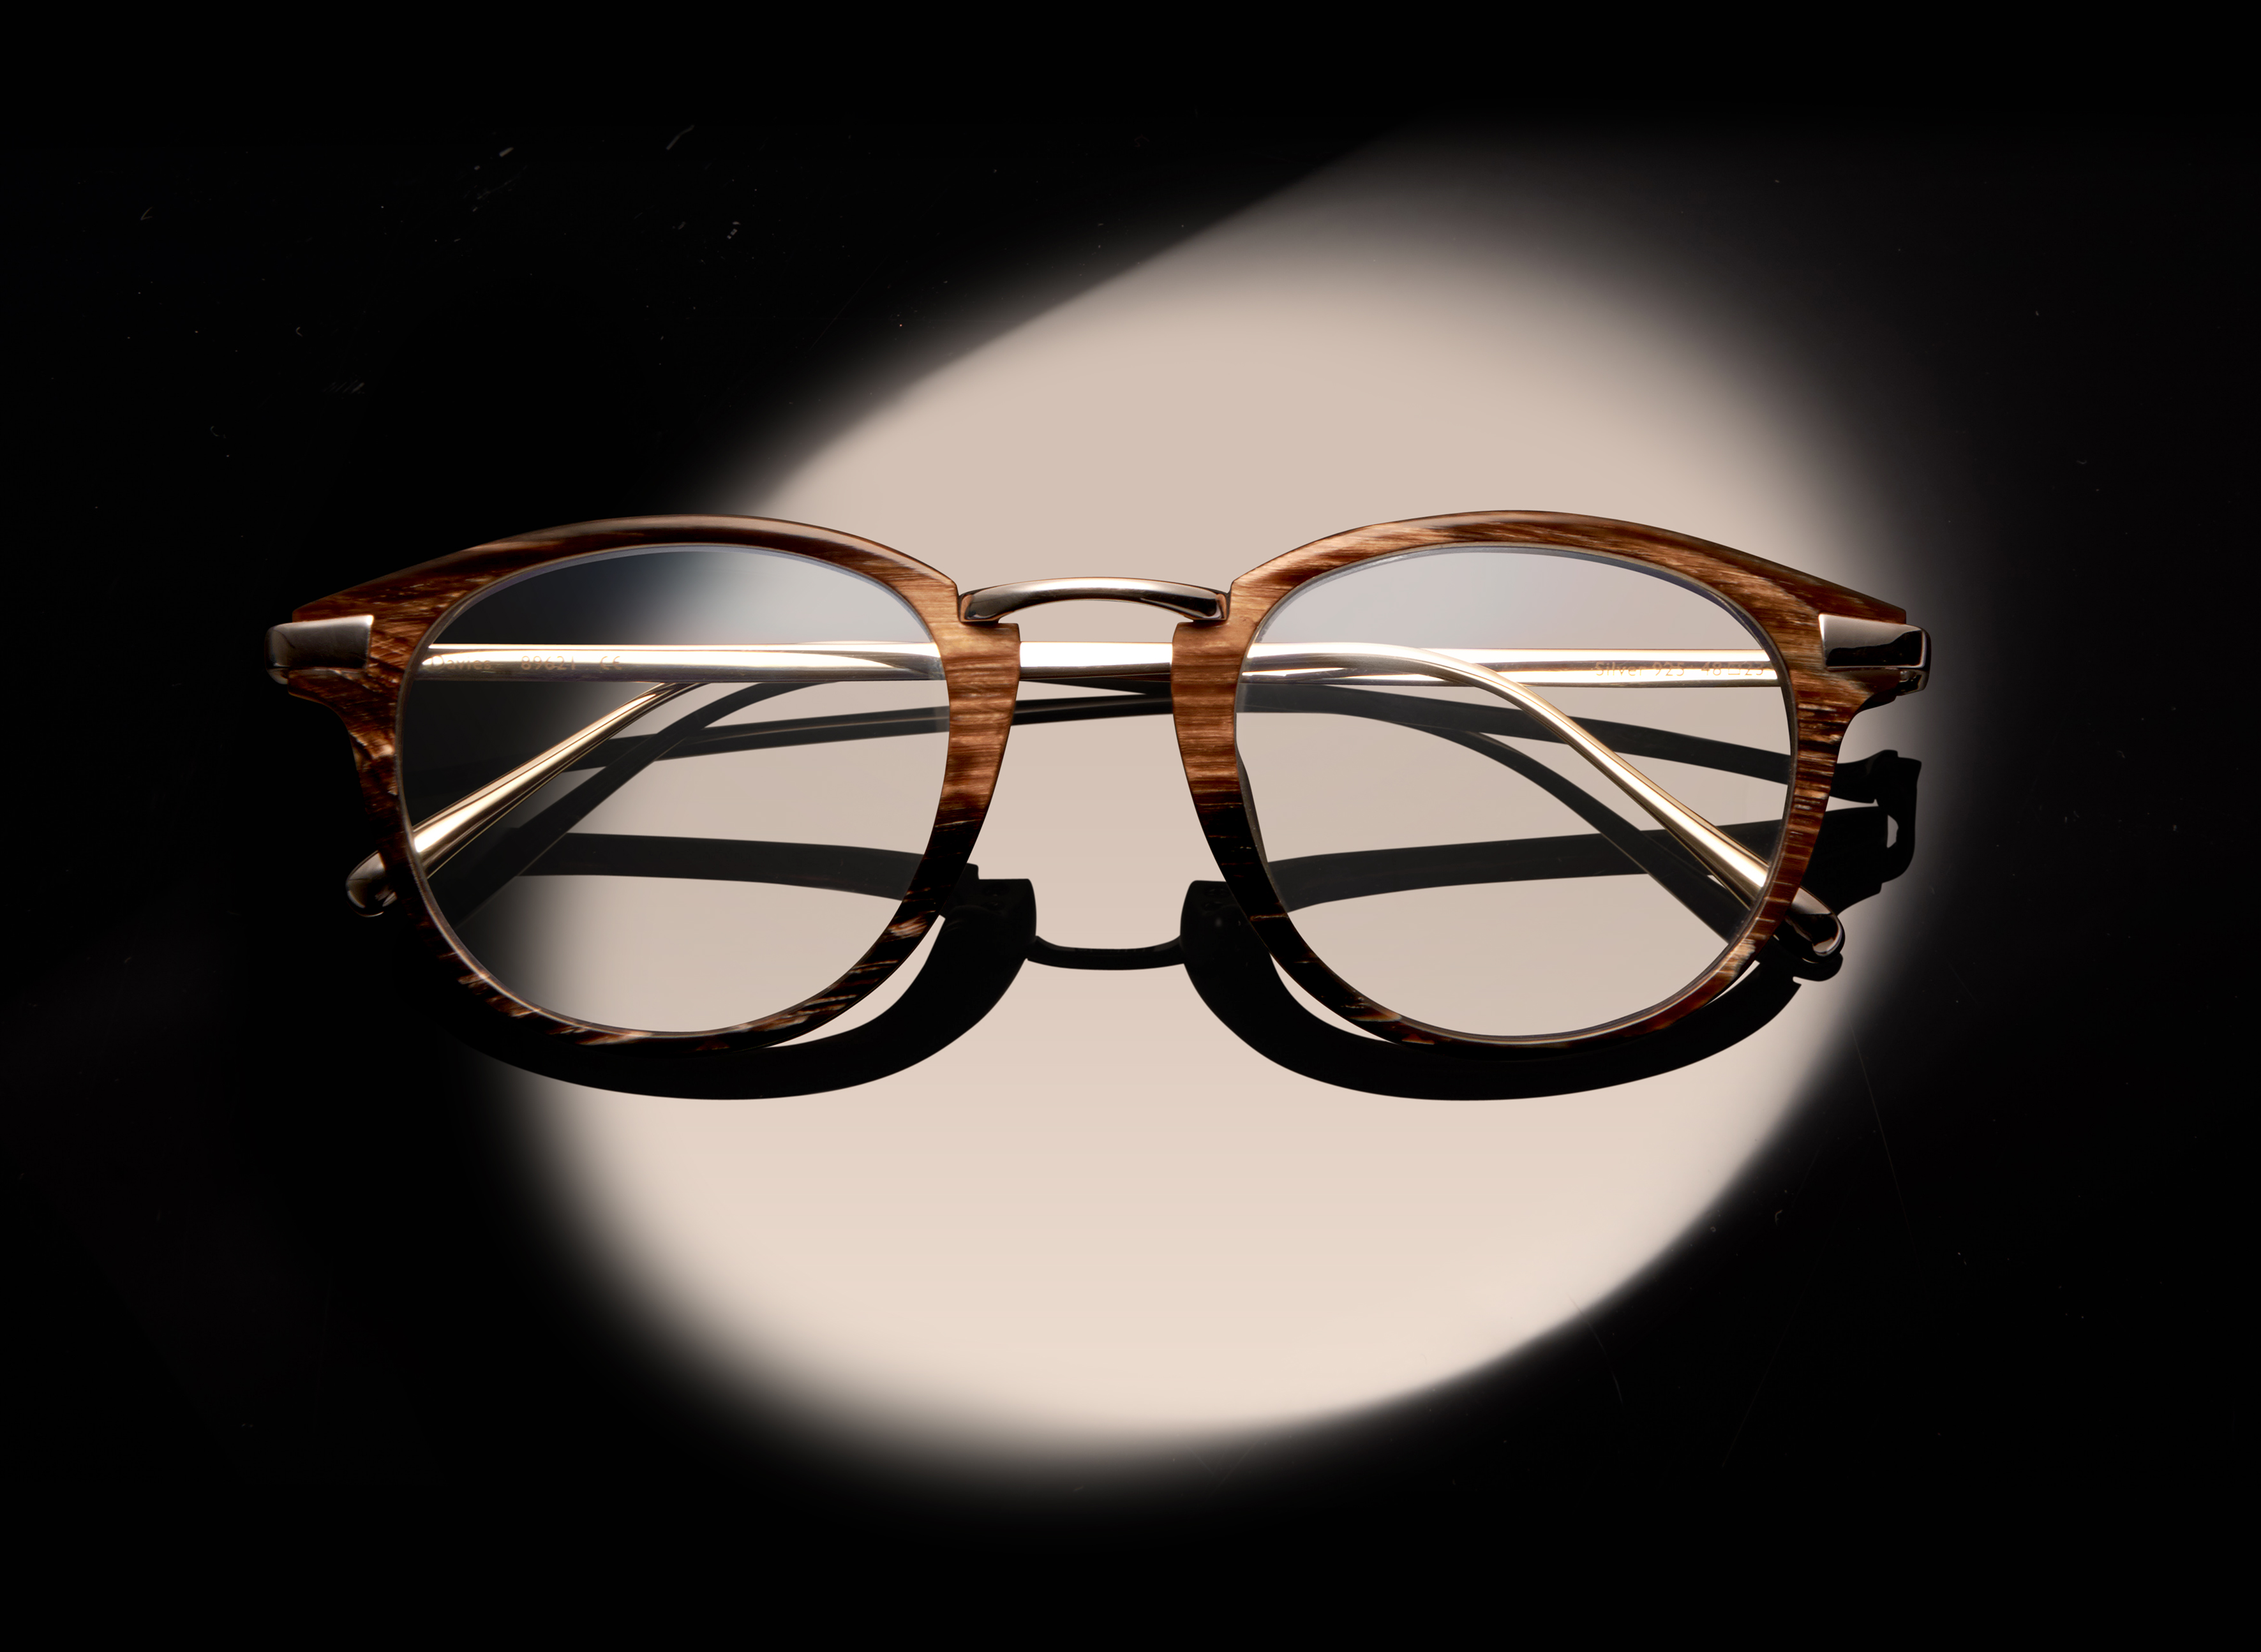 BBR Optometry close 50th anniversary celebrations by unveiling Precious Collection by Tom Davies